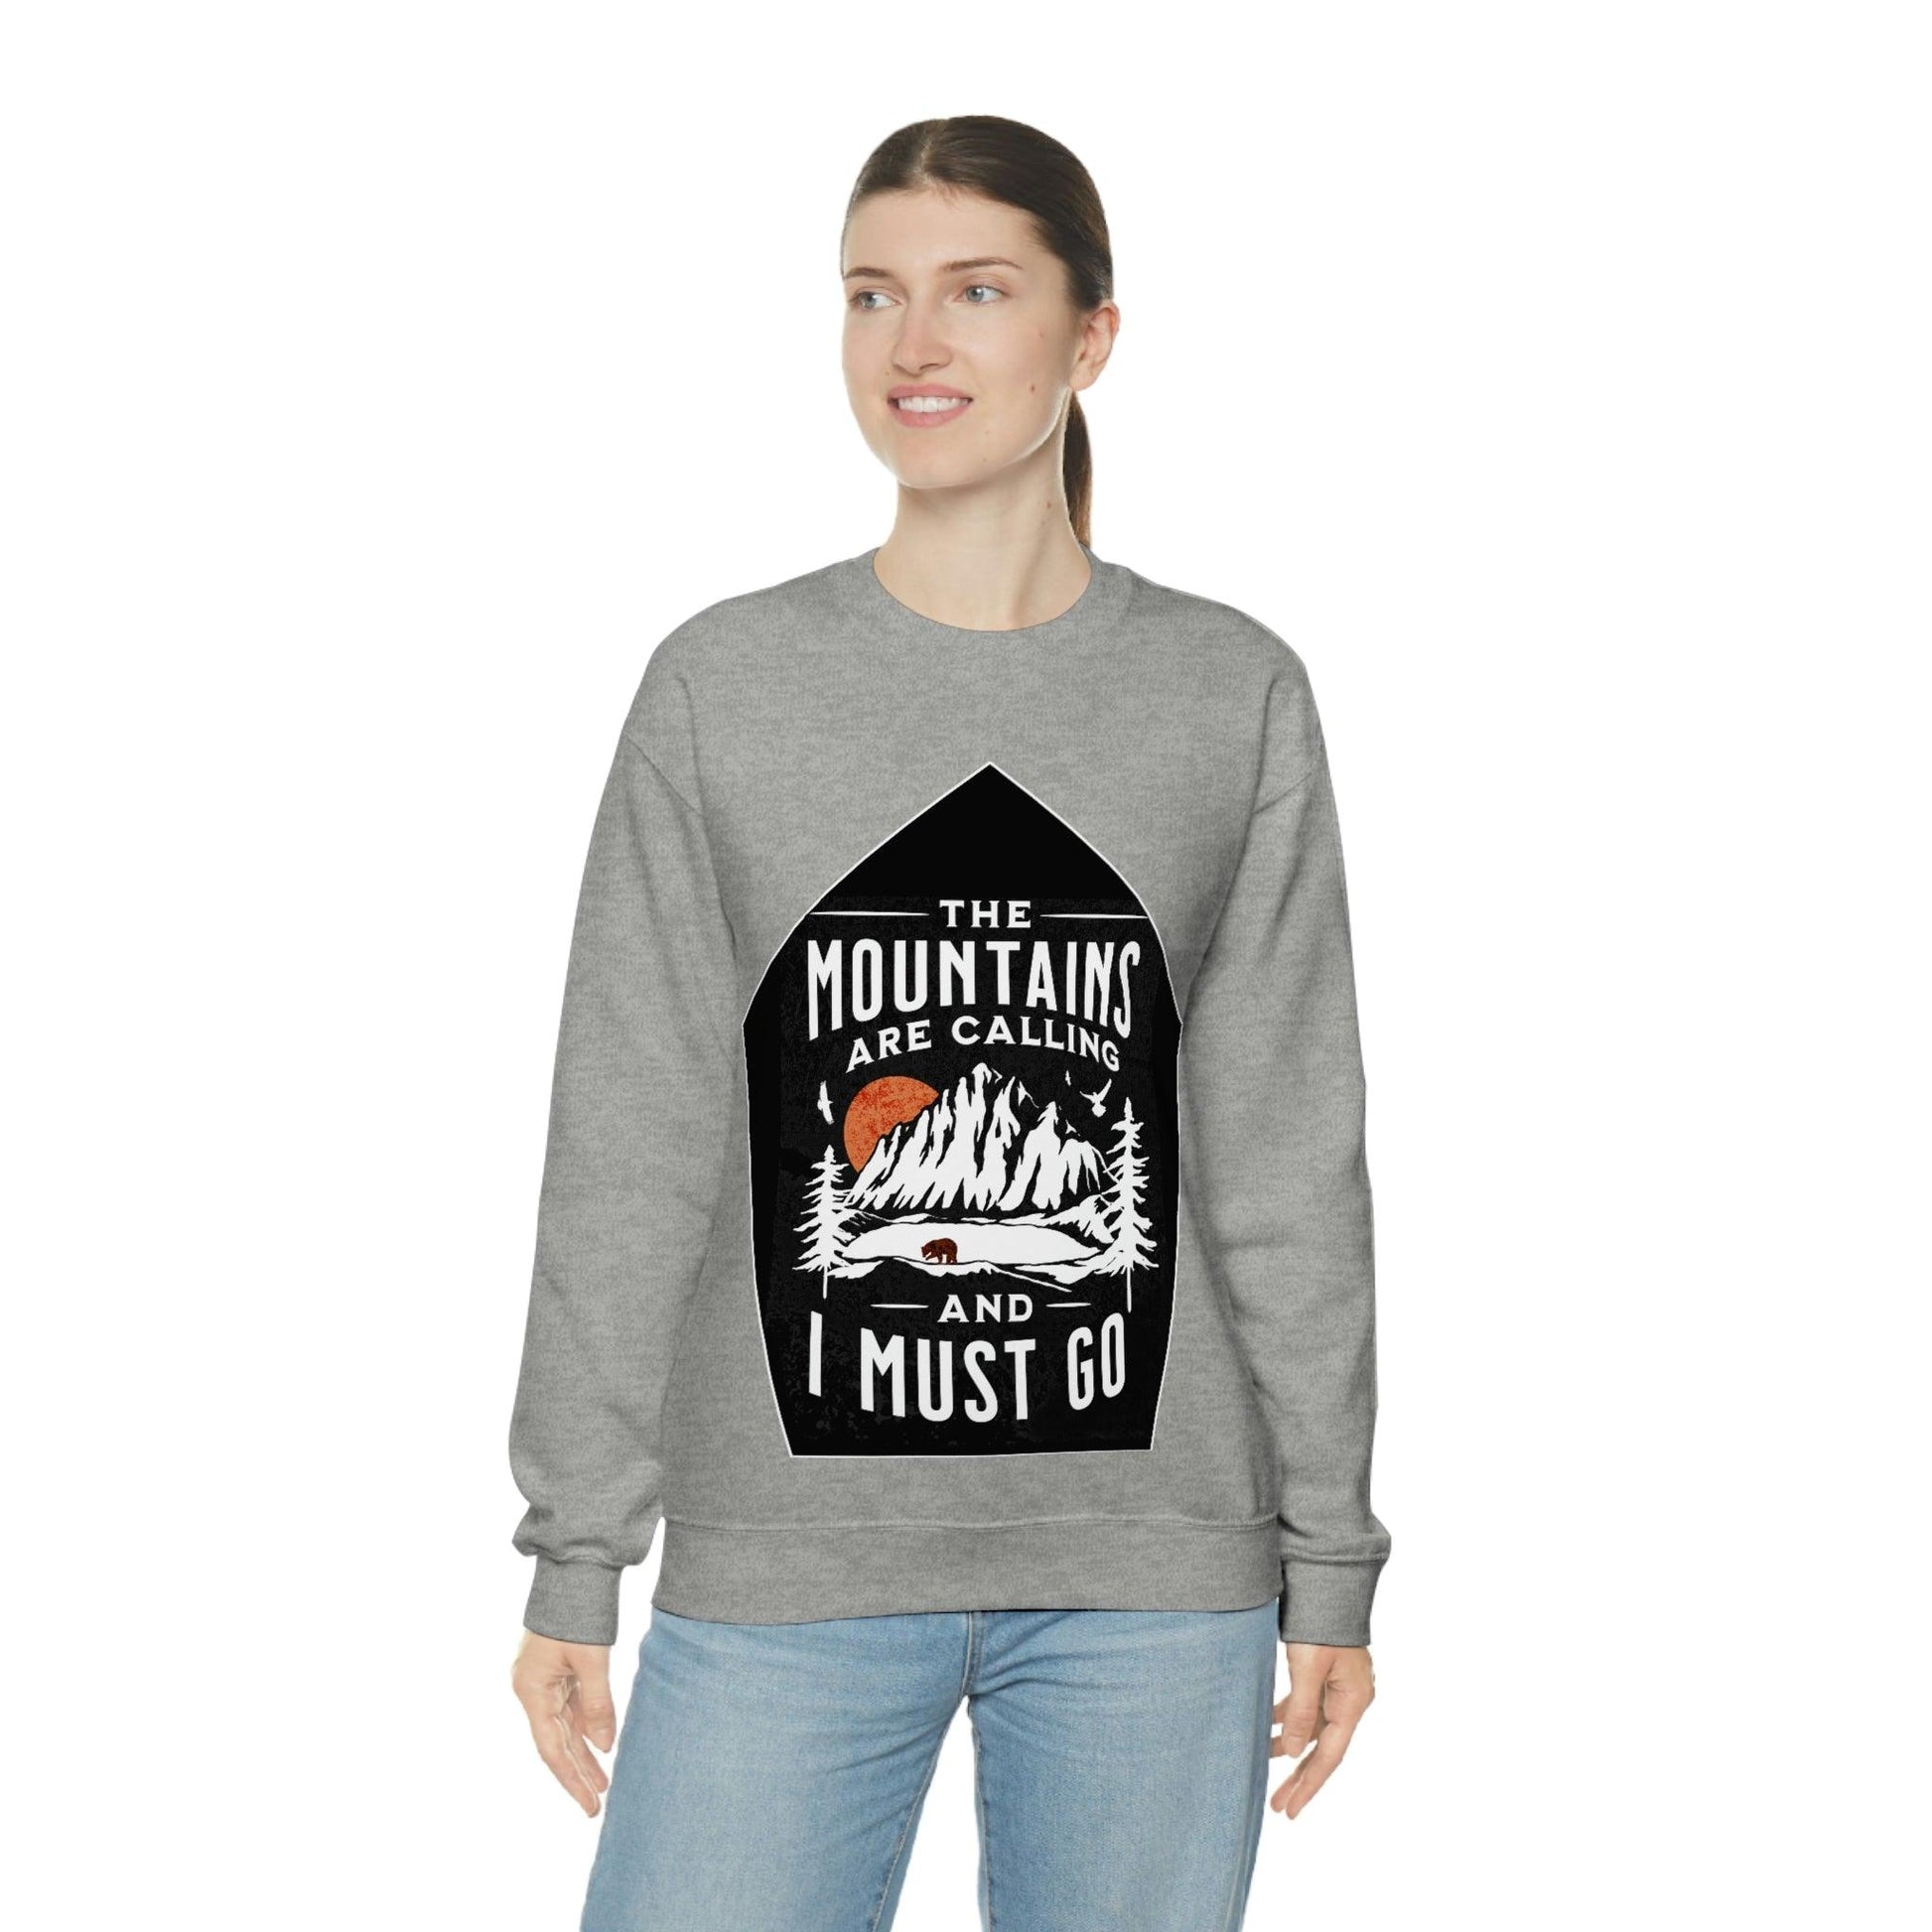 The Mountains are Calling and I Must Go, Crewneck Sweatshirt - Giftsmojo